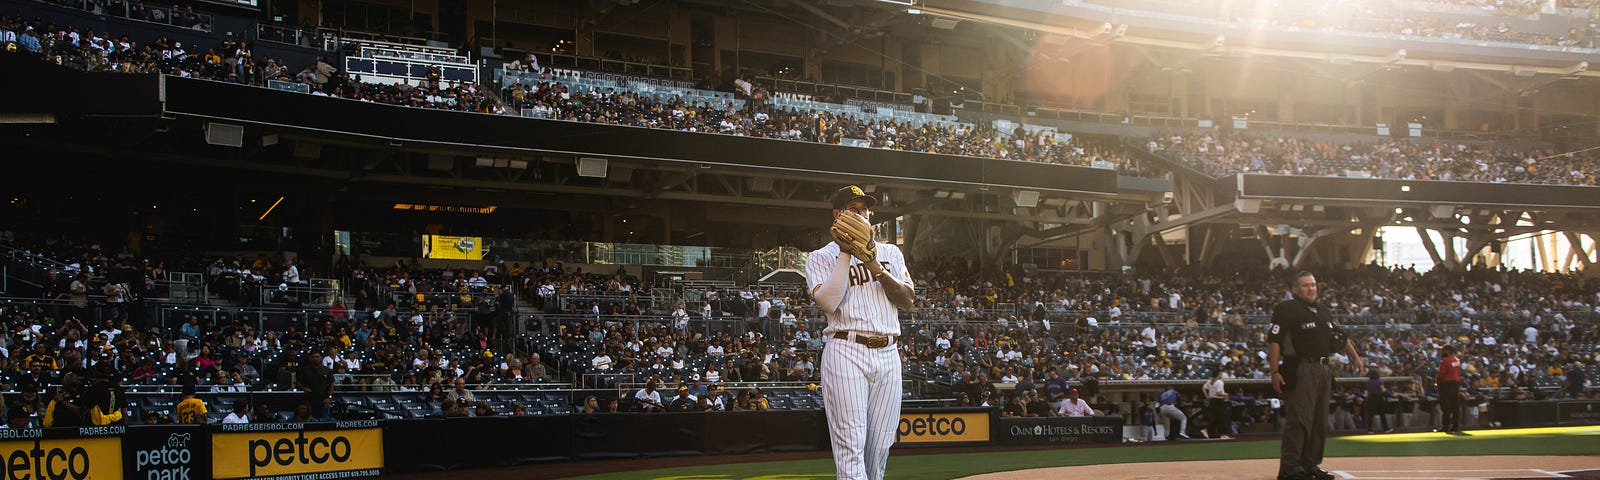 Padres Homestand No. 12 at Petco Park, by FriarWire